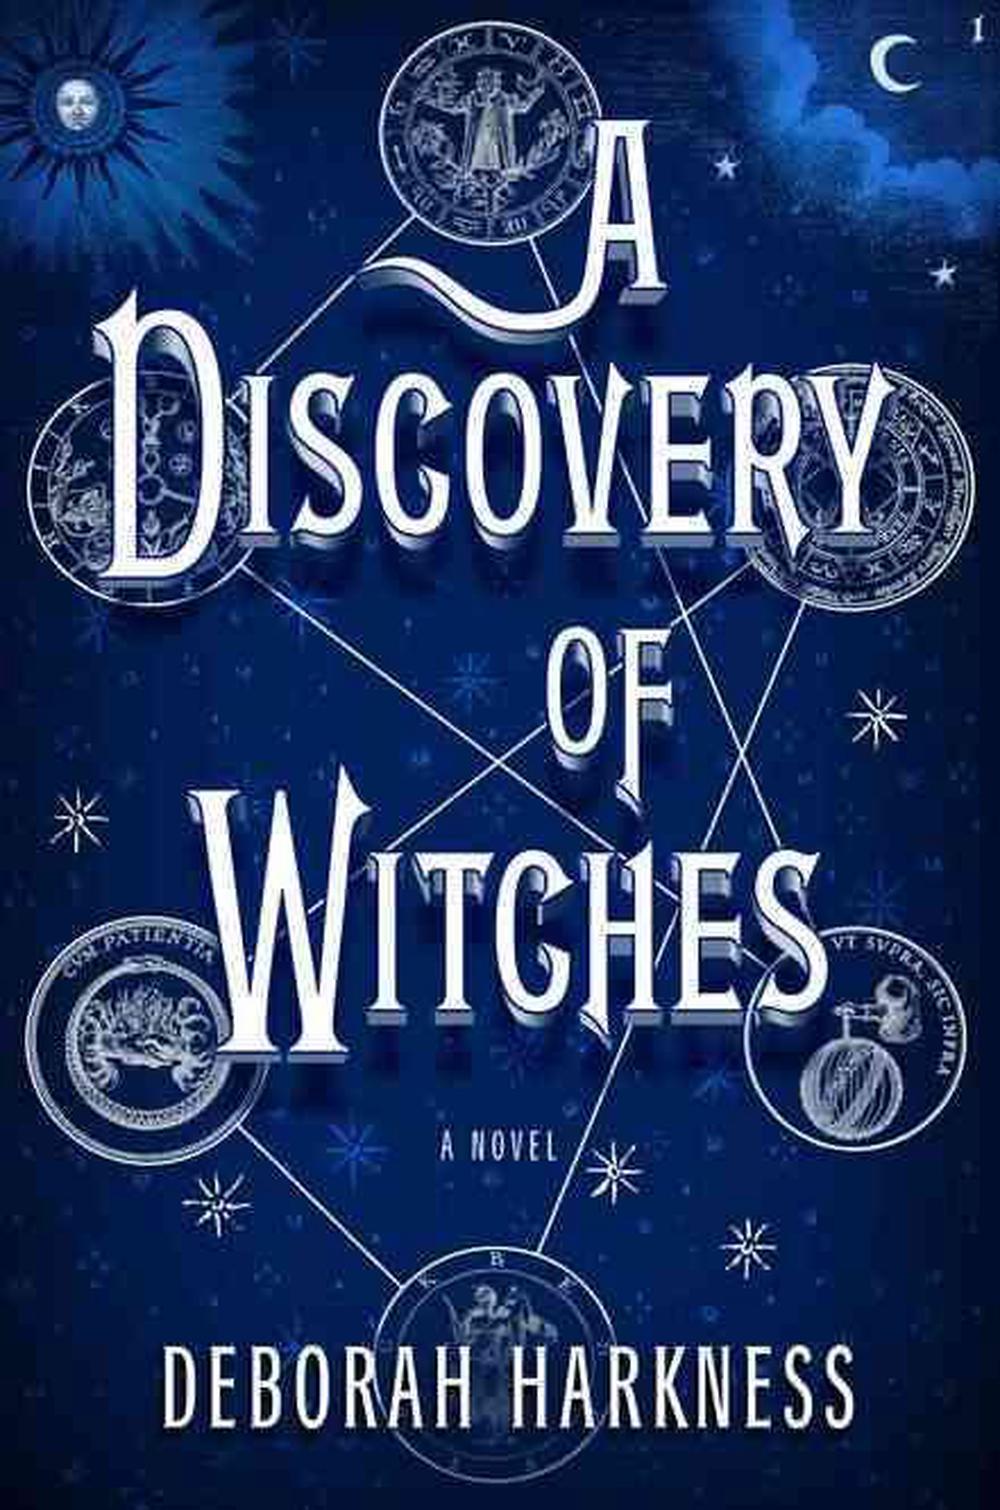 94 Top Best Writers A Discovery Of Witches Books In Order 